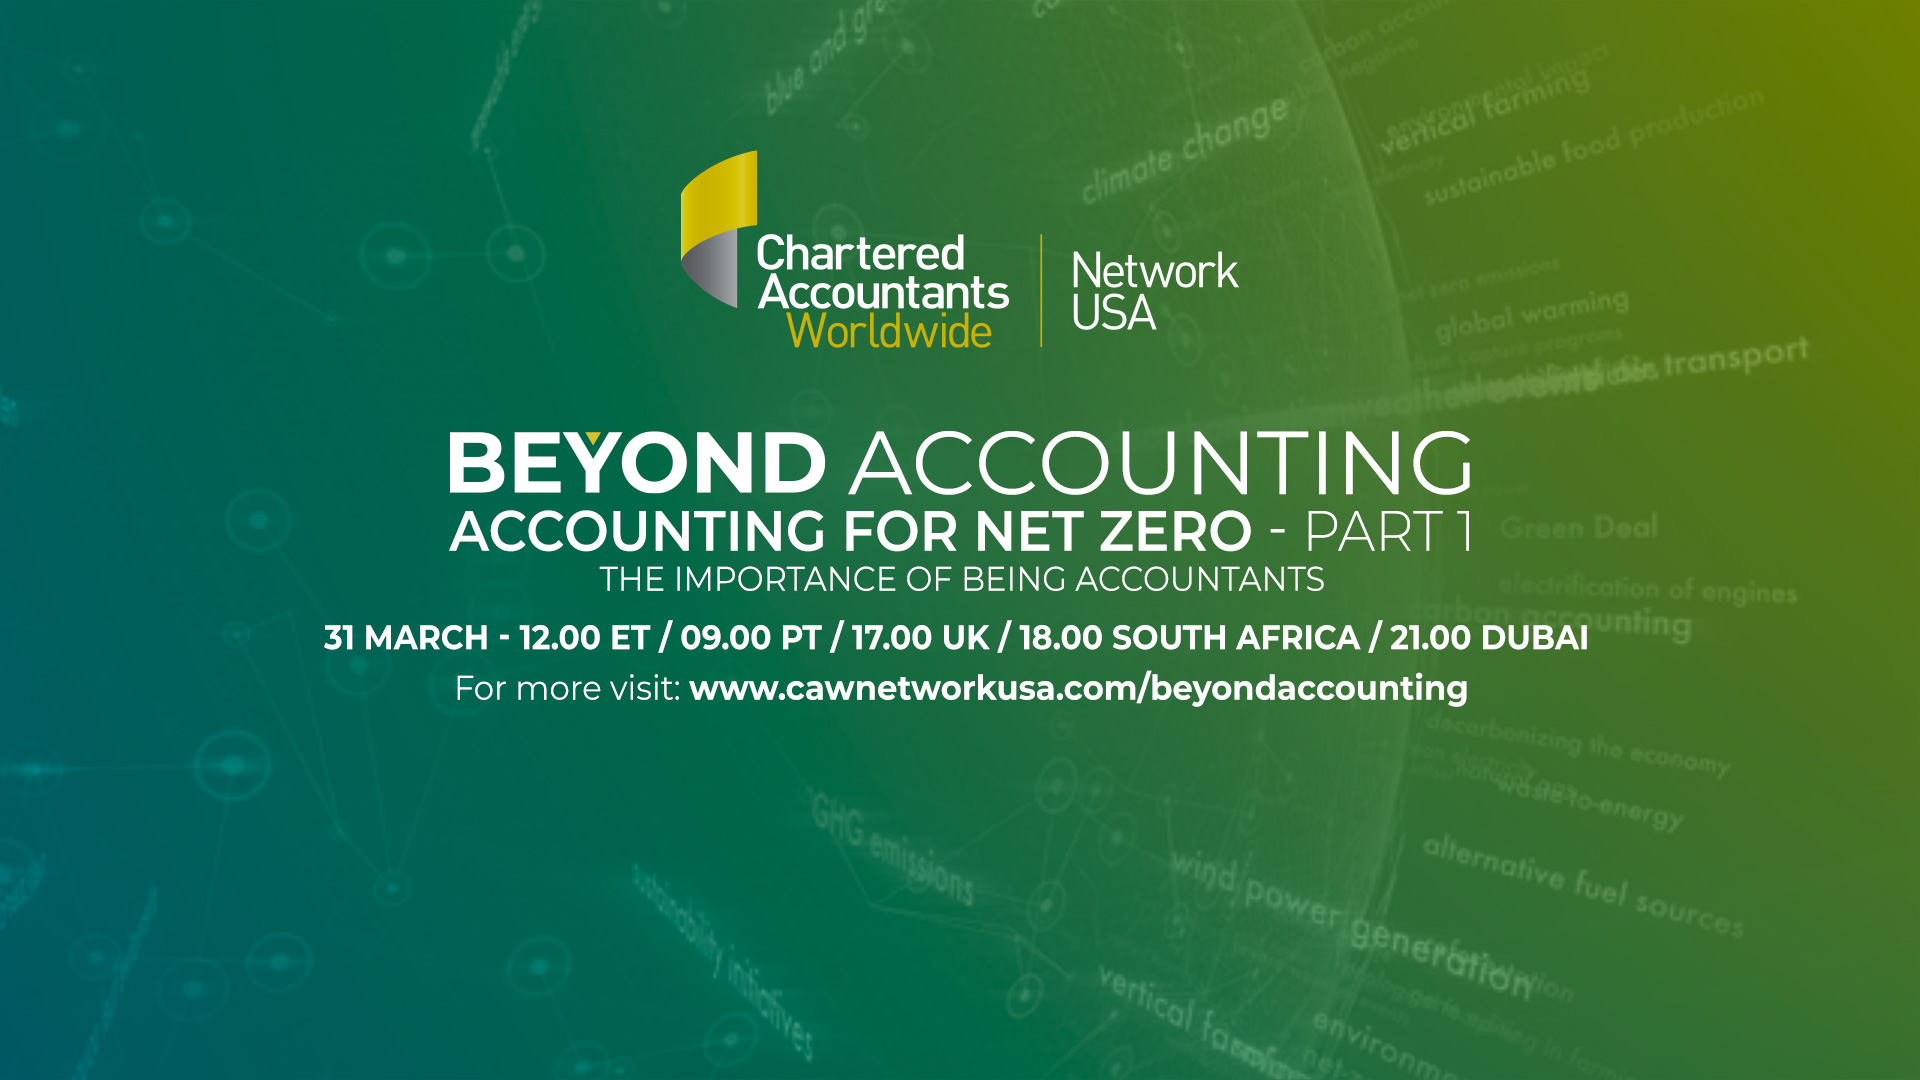 Beyond-Accounting-Accounting-for-Net-Zero-1920x1080-1